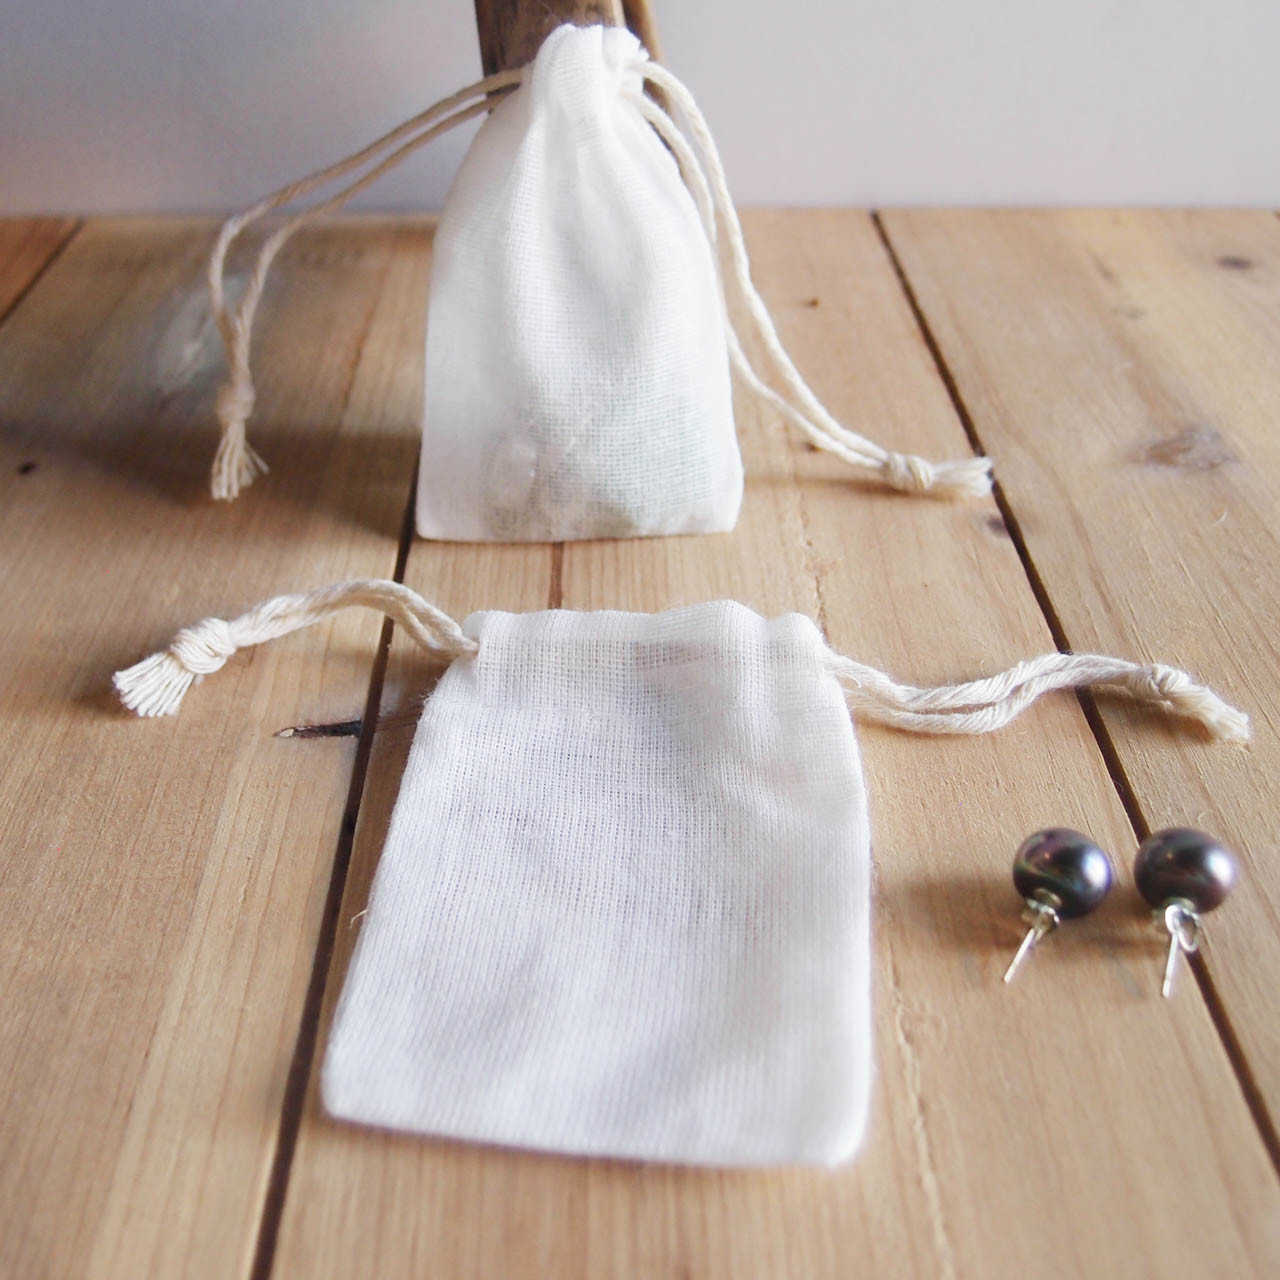 Cotton See-thru Muslin Bags with Cotton Drawstring (9 sizes)